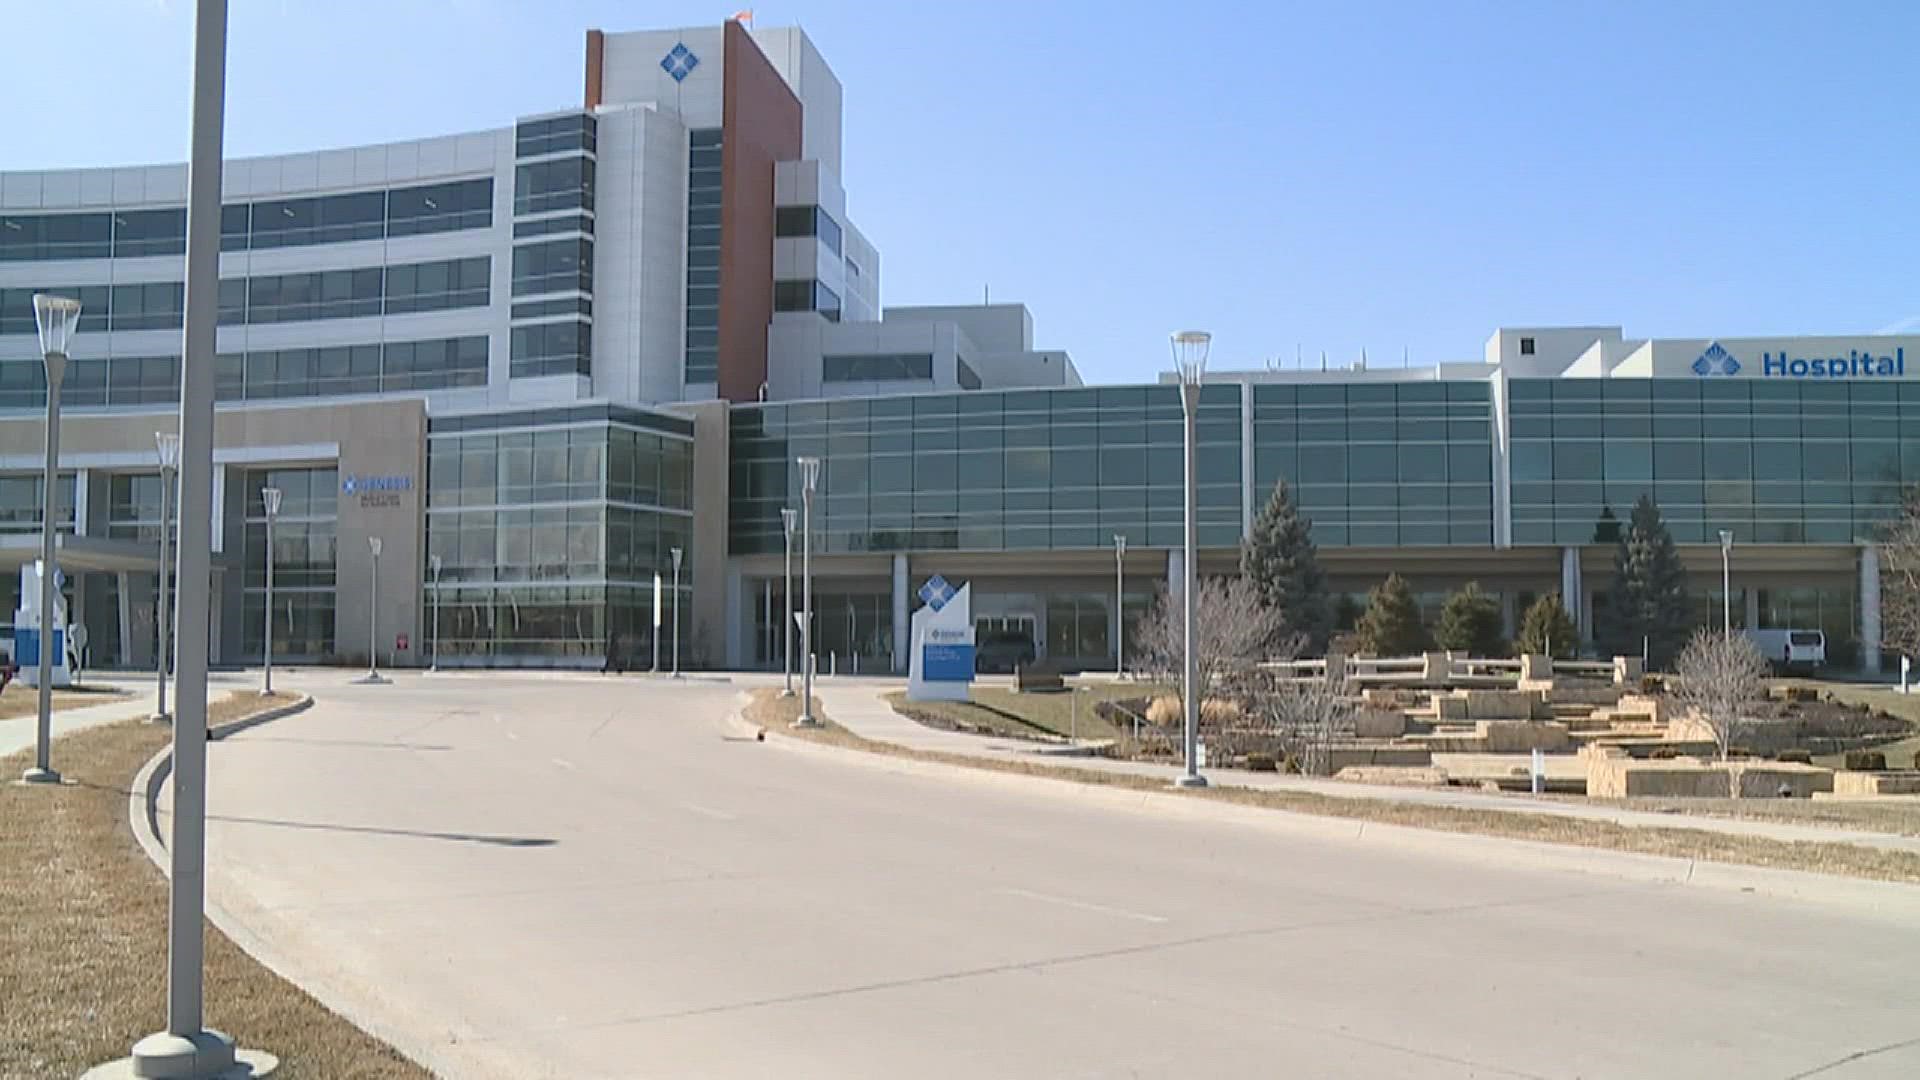 Genesis Health System said it will decide by summer 2022 whether it will partner with another health system or remain independent.